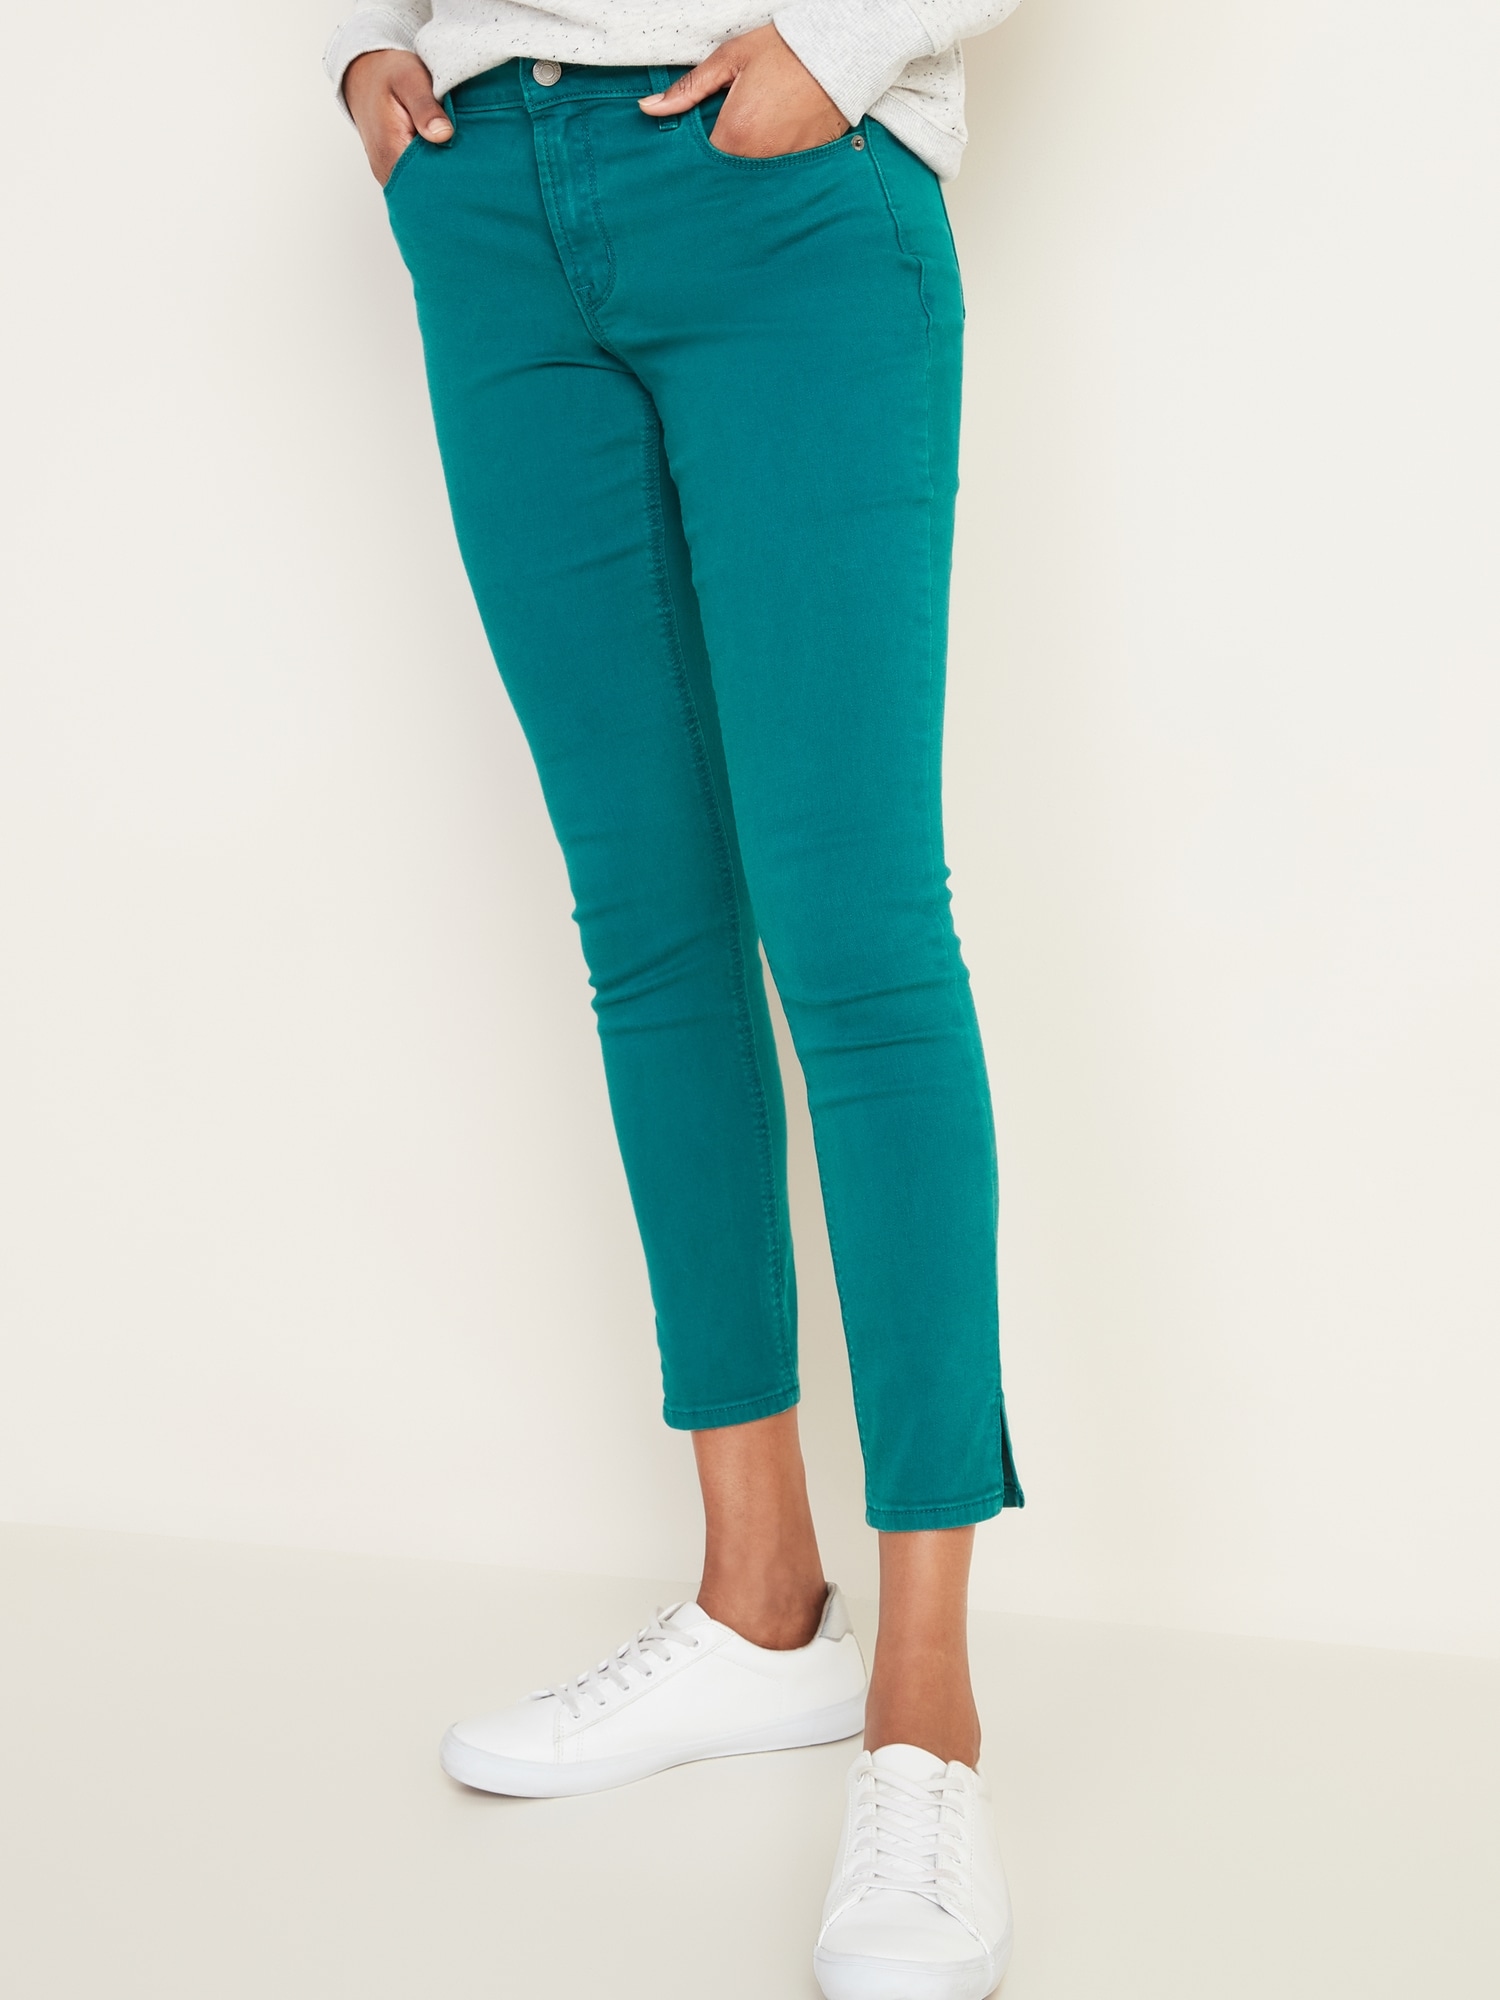 teal colored jeans womens